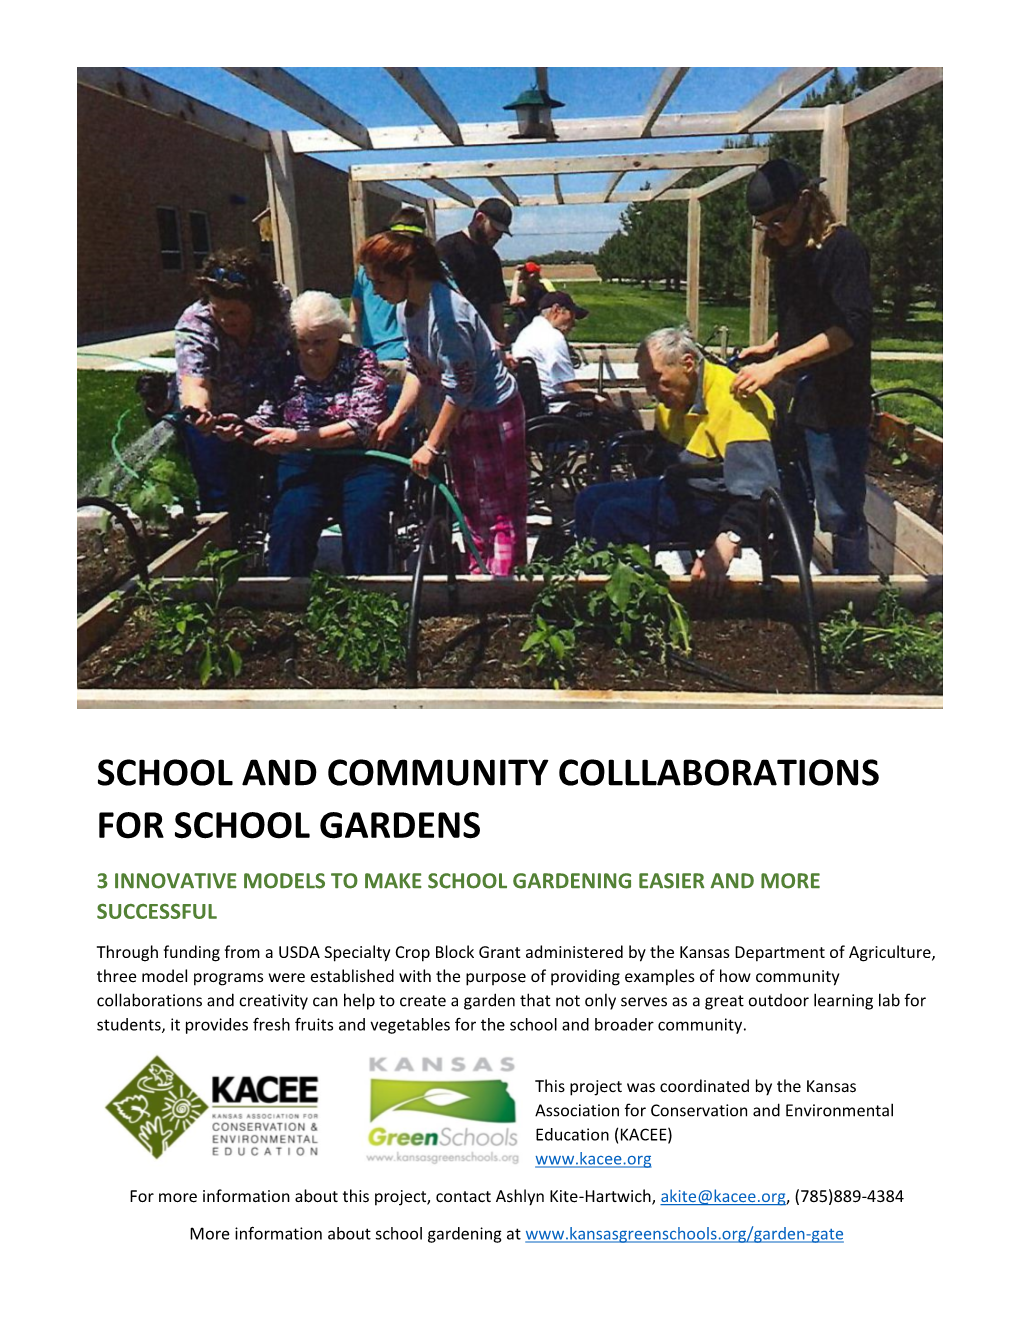 School and Community Colllaborations for School Gardens 3 Innovative Models to Make School Gardening Easier and More Successful